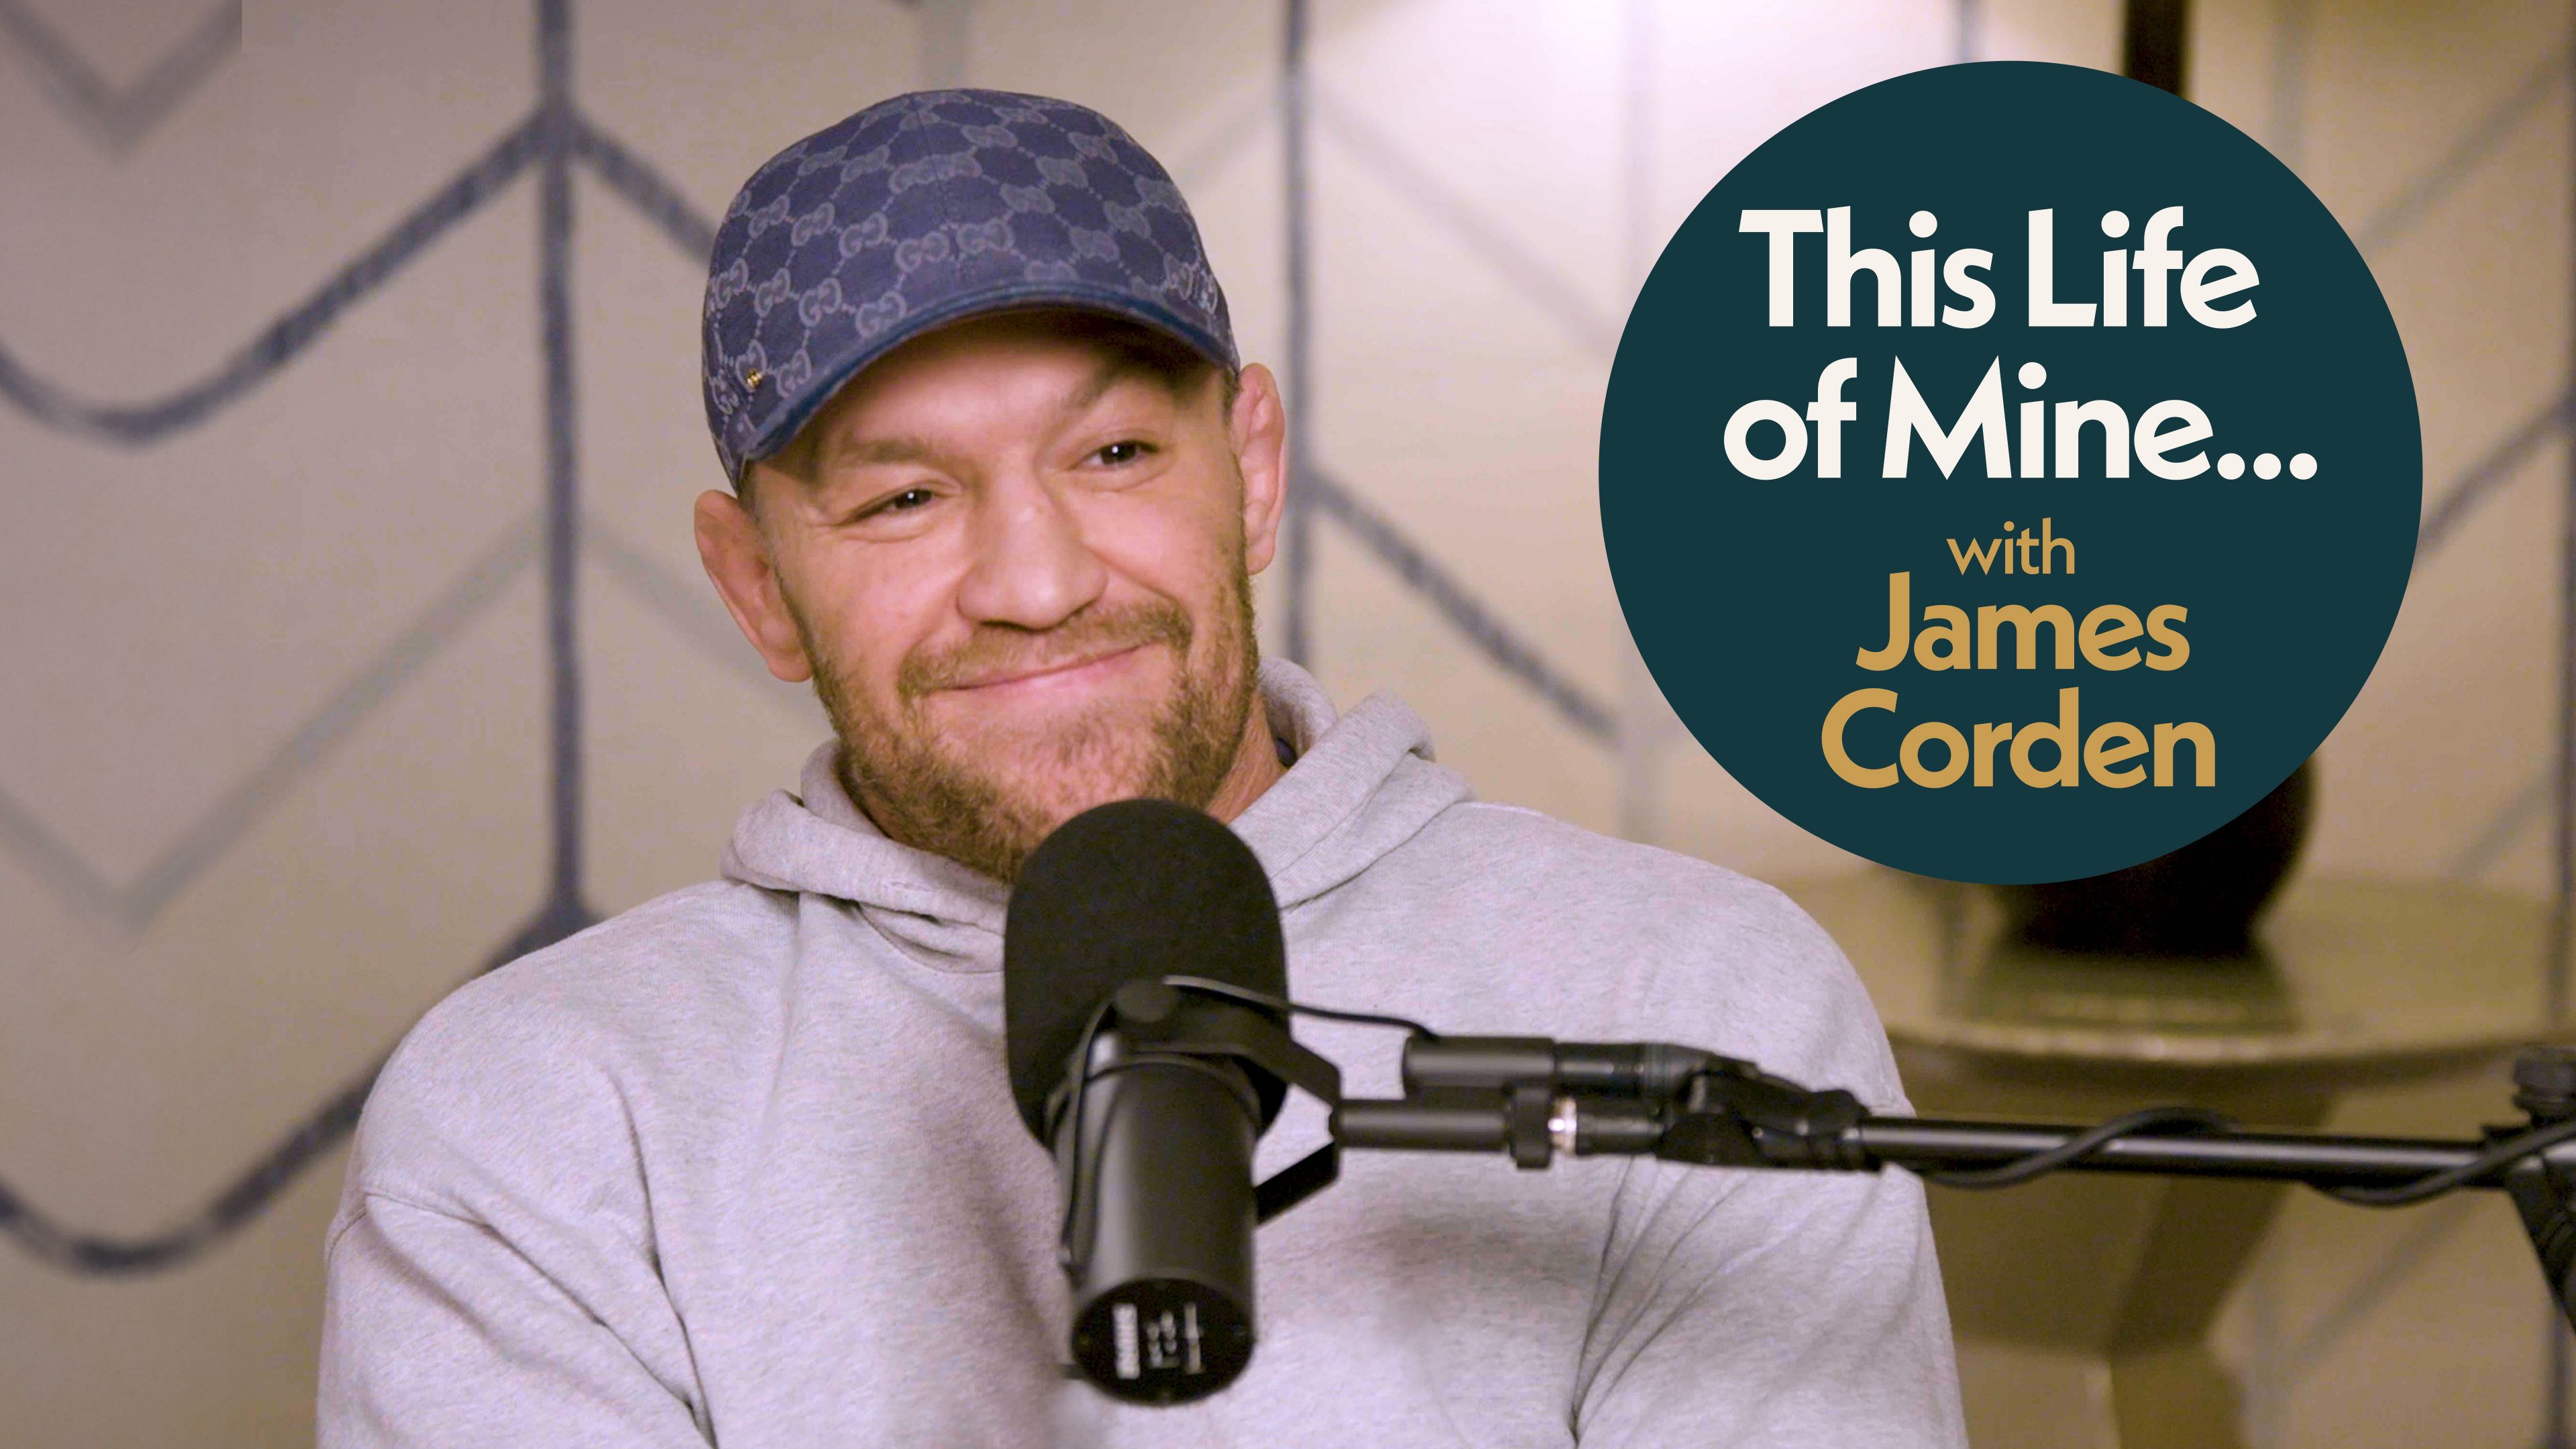 Conor McGregor on This Life of Mine with James Corden on SiriusXM